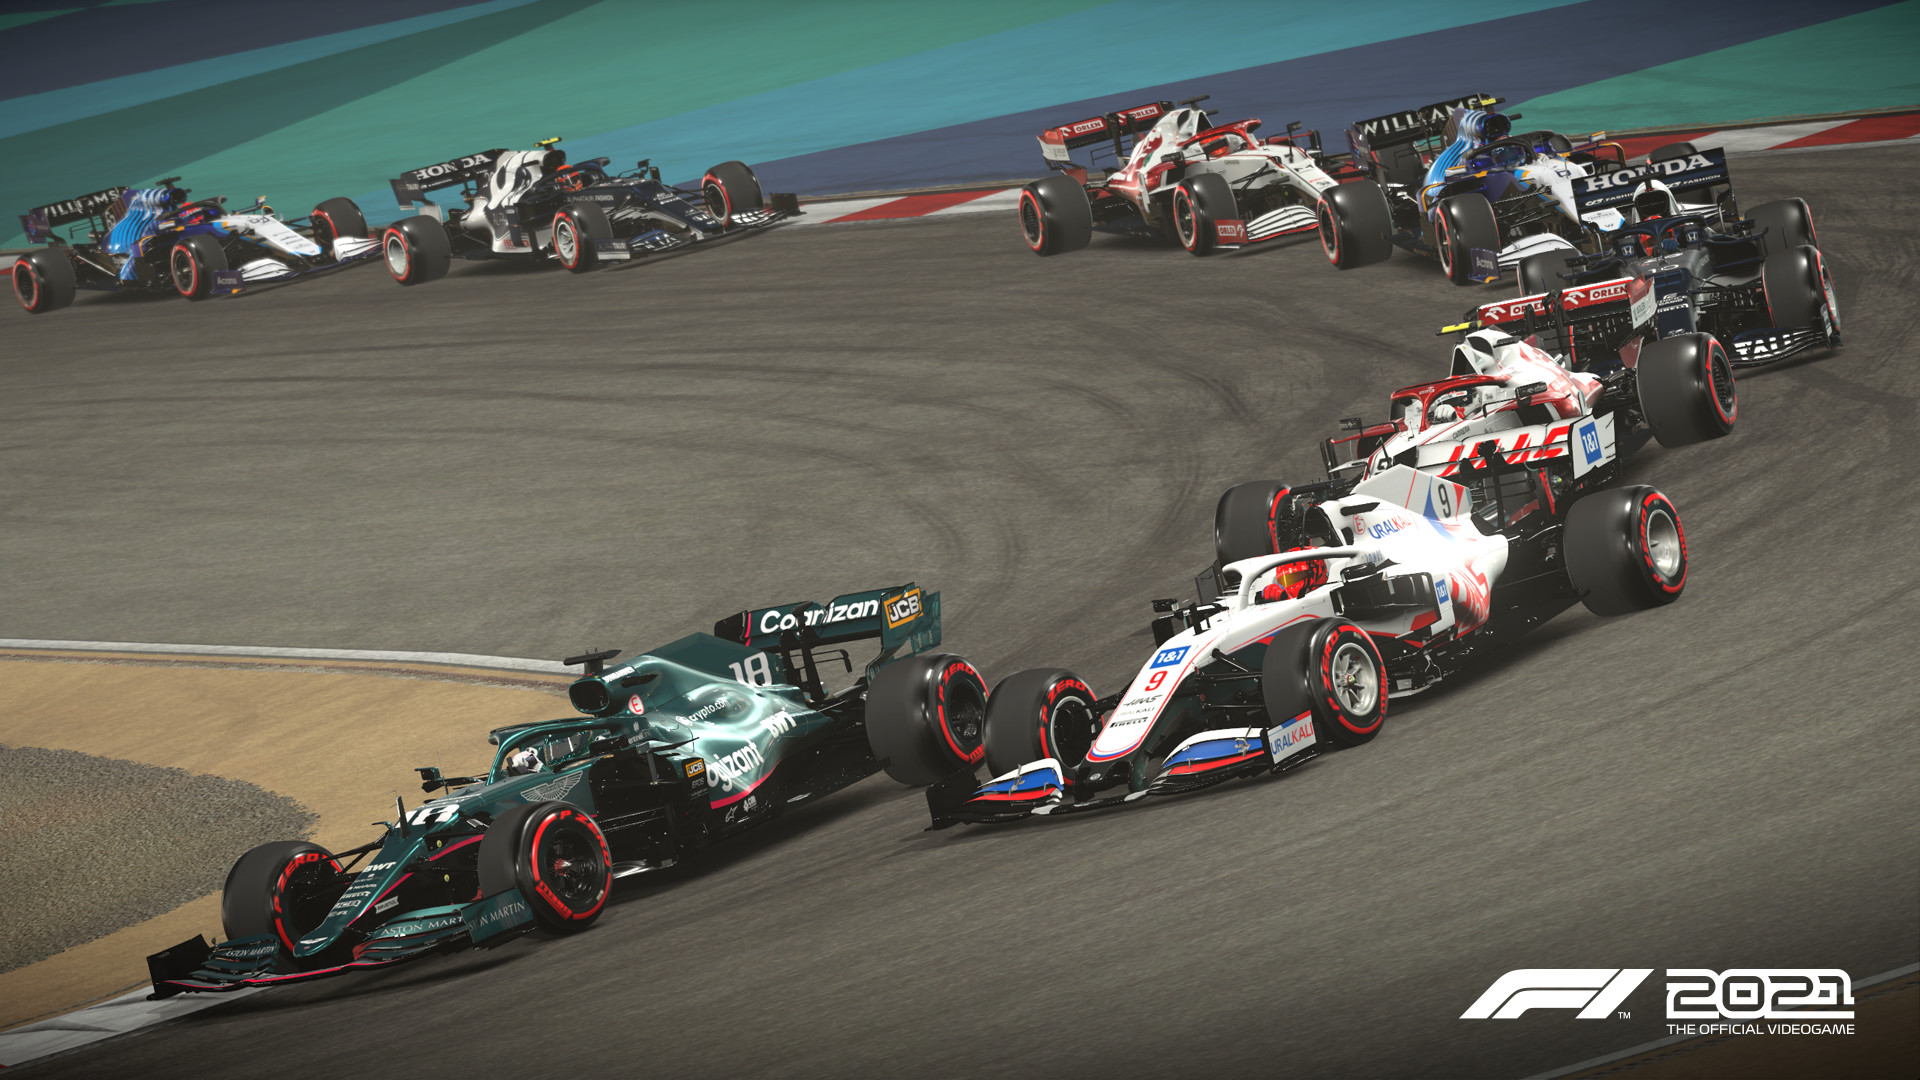 F1 2021s Newest Update Brings Online Fixes and General Improvements